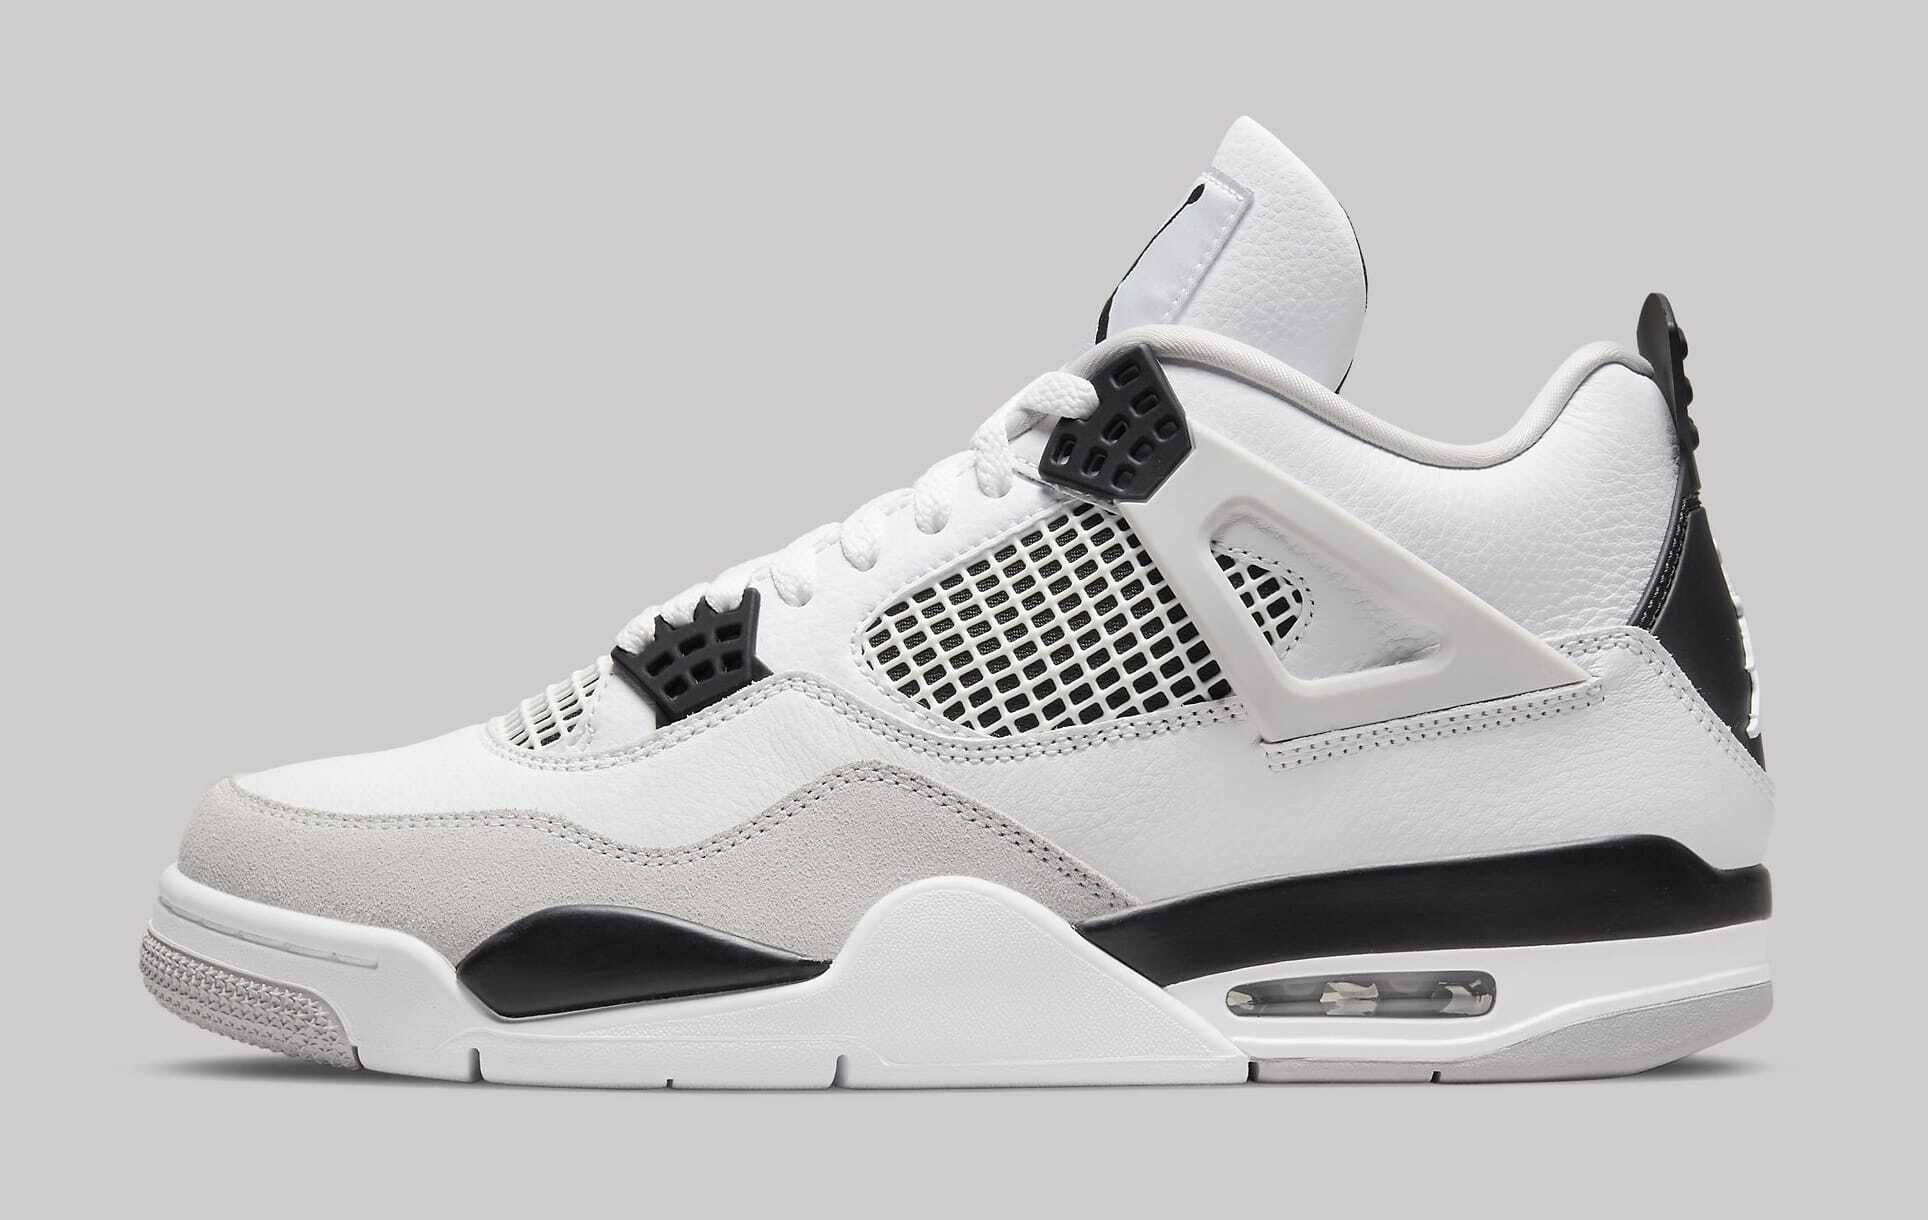 Off-White's Air Jordan 4 Collab to Release This Month